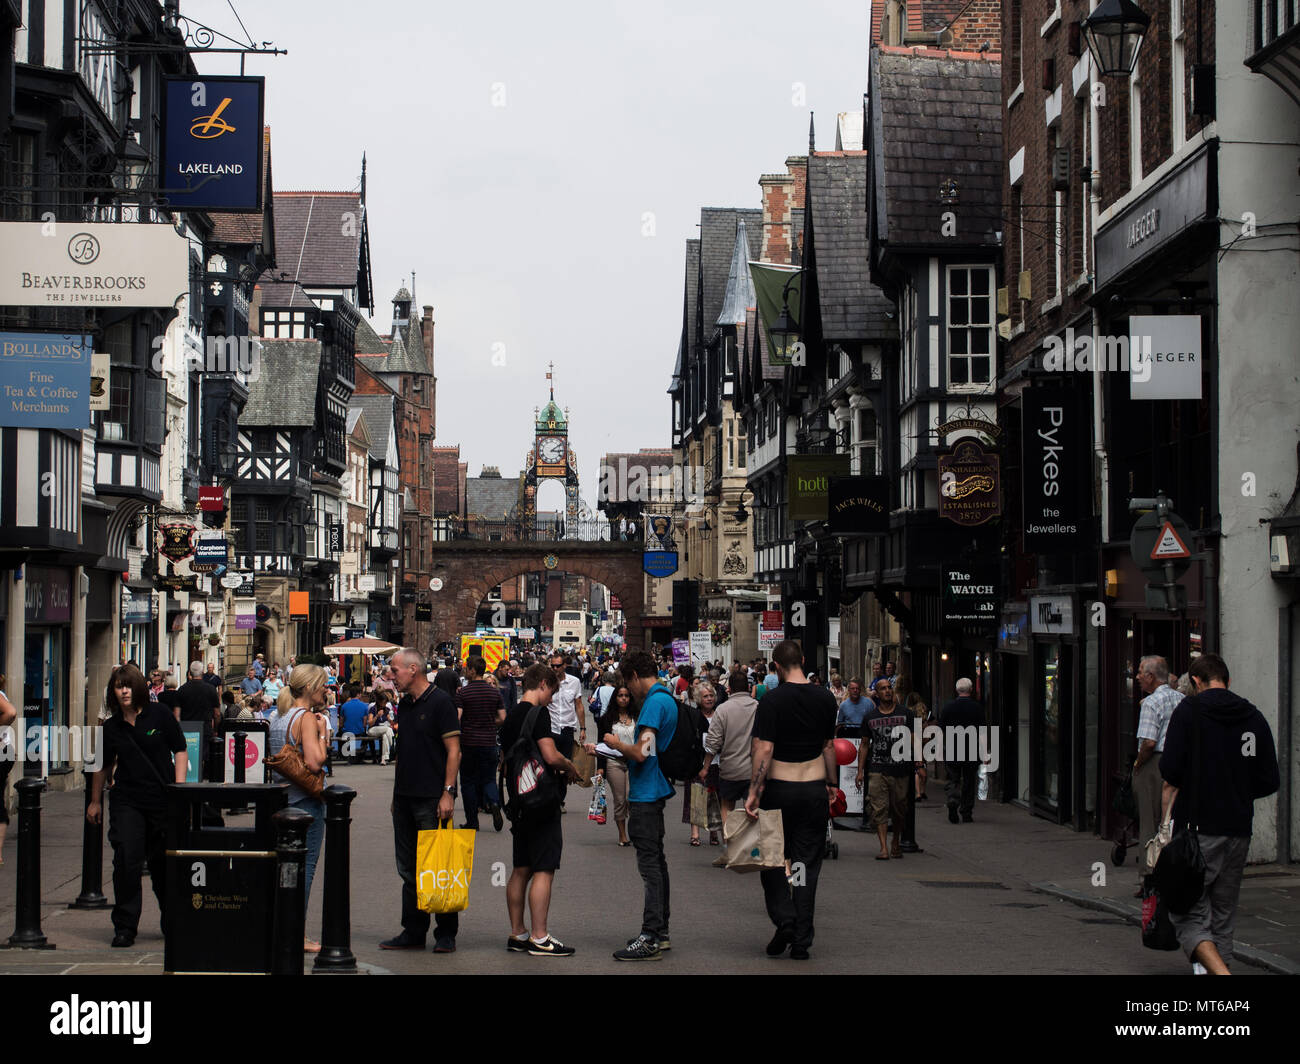 Crowded Eastgate street seen from the Eastgate clock in Chester, England, UK. Stock Photo